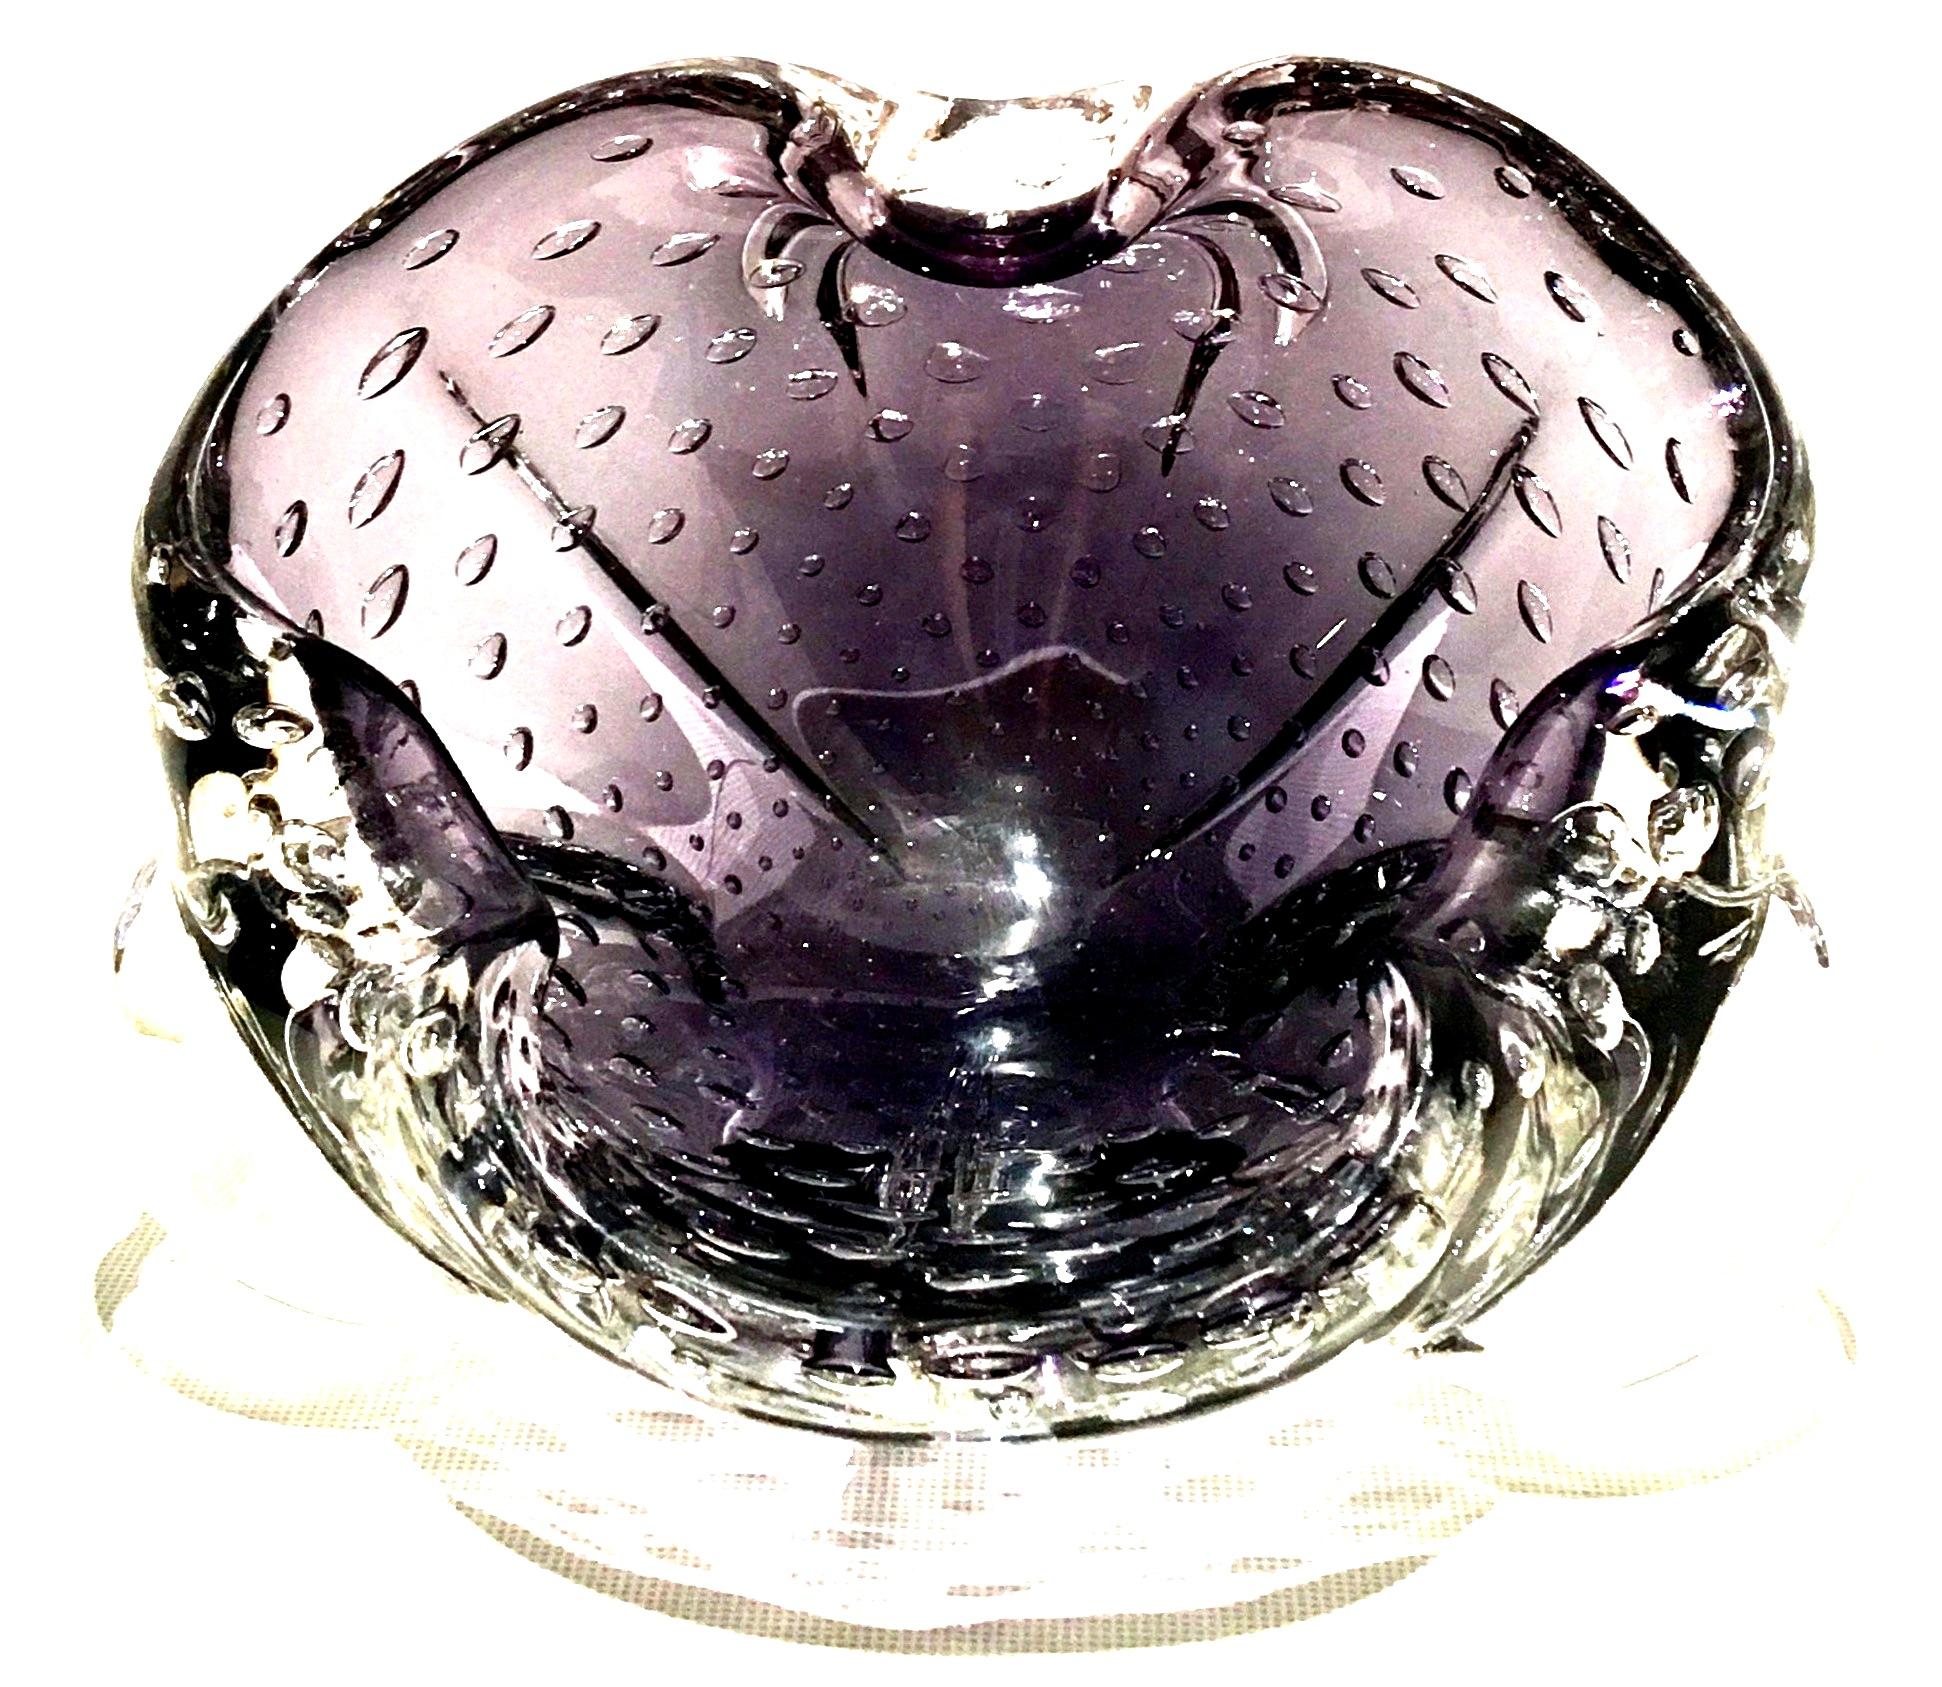 1950s Italian Murano glass amethyst and clear encased bubbles organic form bowl. Made in Italy.